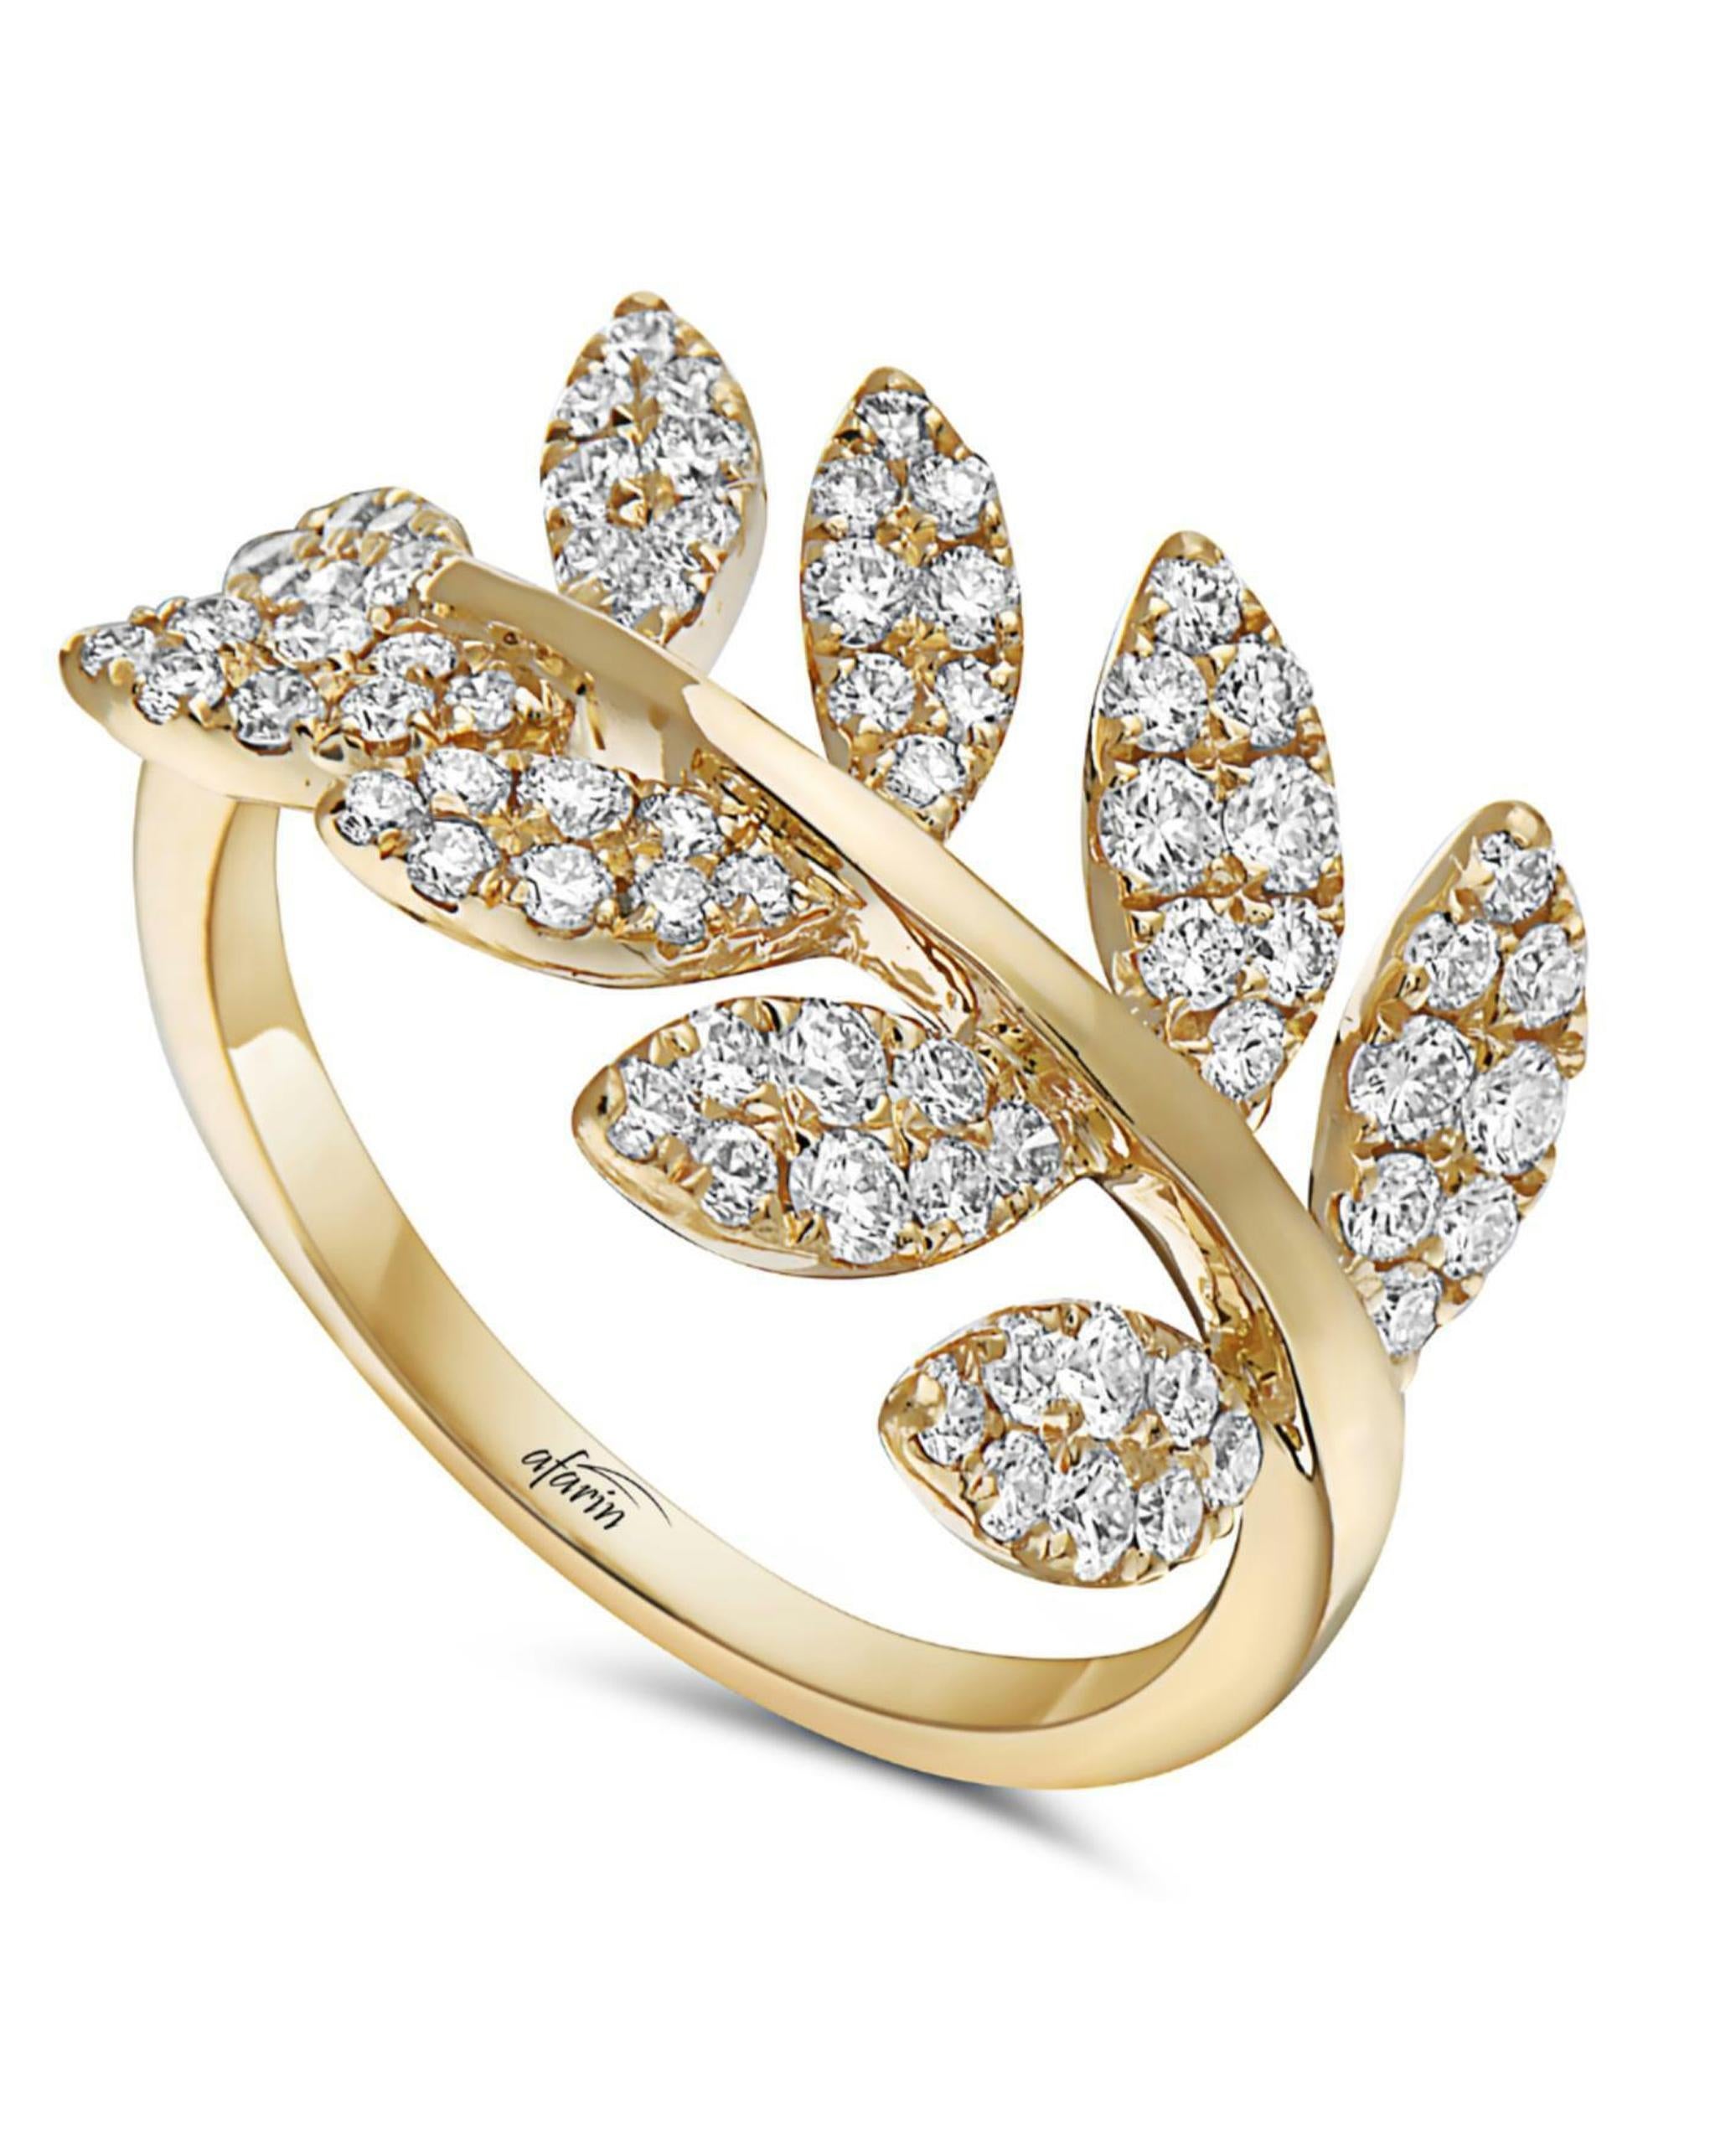 18K yellow gold leaf ring furnished with round brilliant-cut diamonds weighing 0.92 carats total: G color, VS2/SI1 clarity.

- Finger size 6.5 (can be sized)